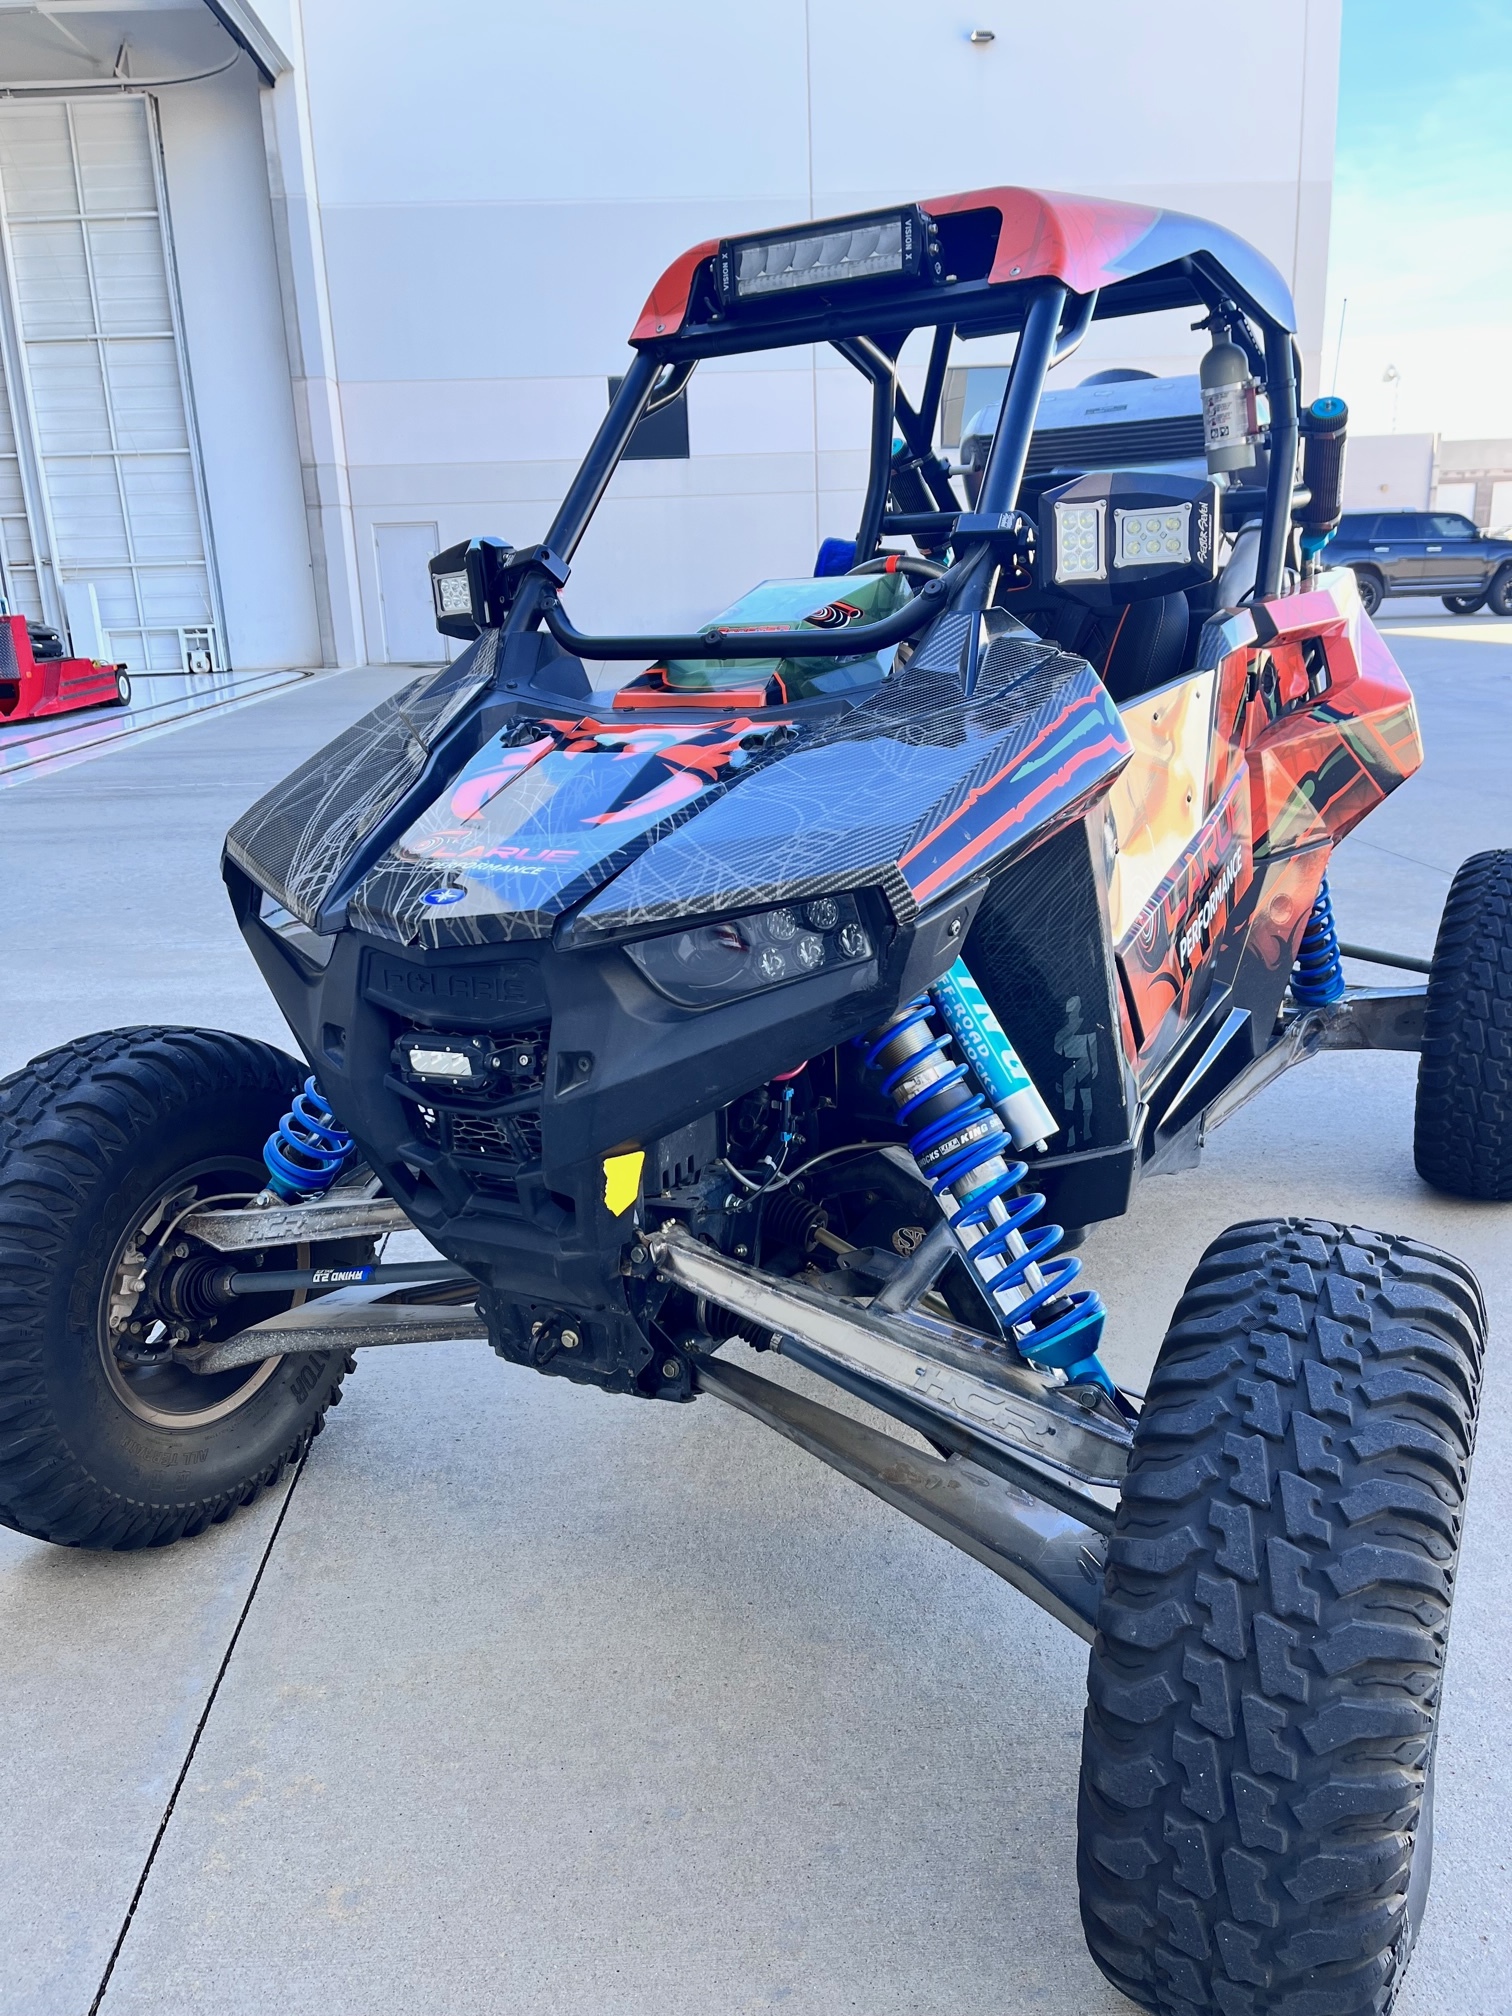 For Sale: 2019 RS1 Turbo LaRue Performance Build - $23,000 - photo0